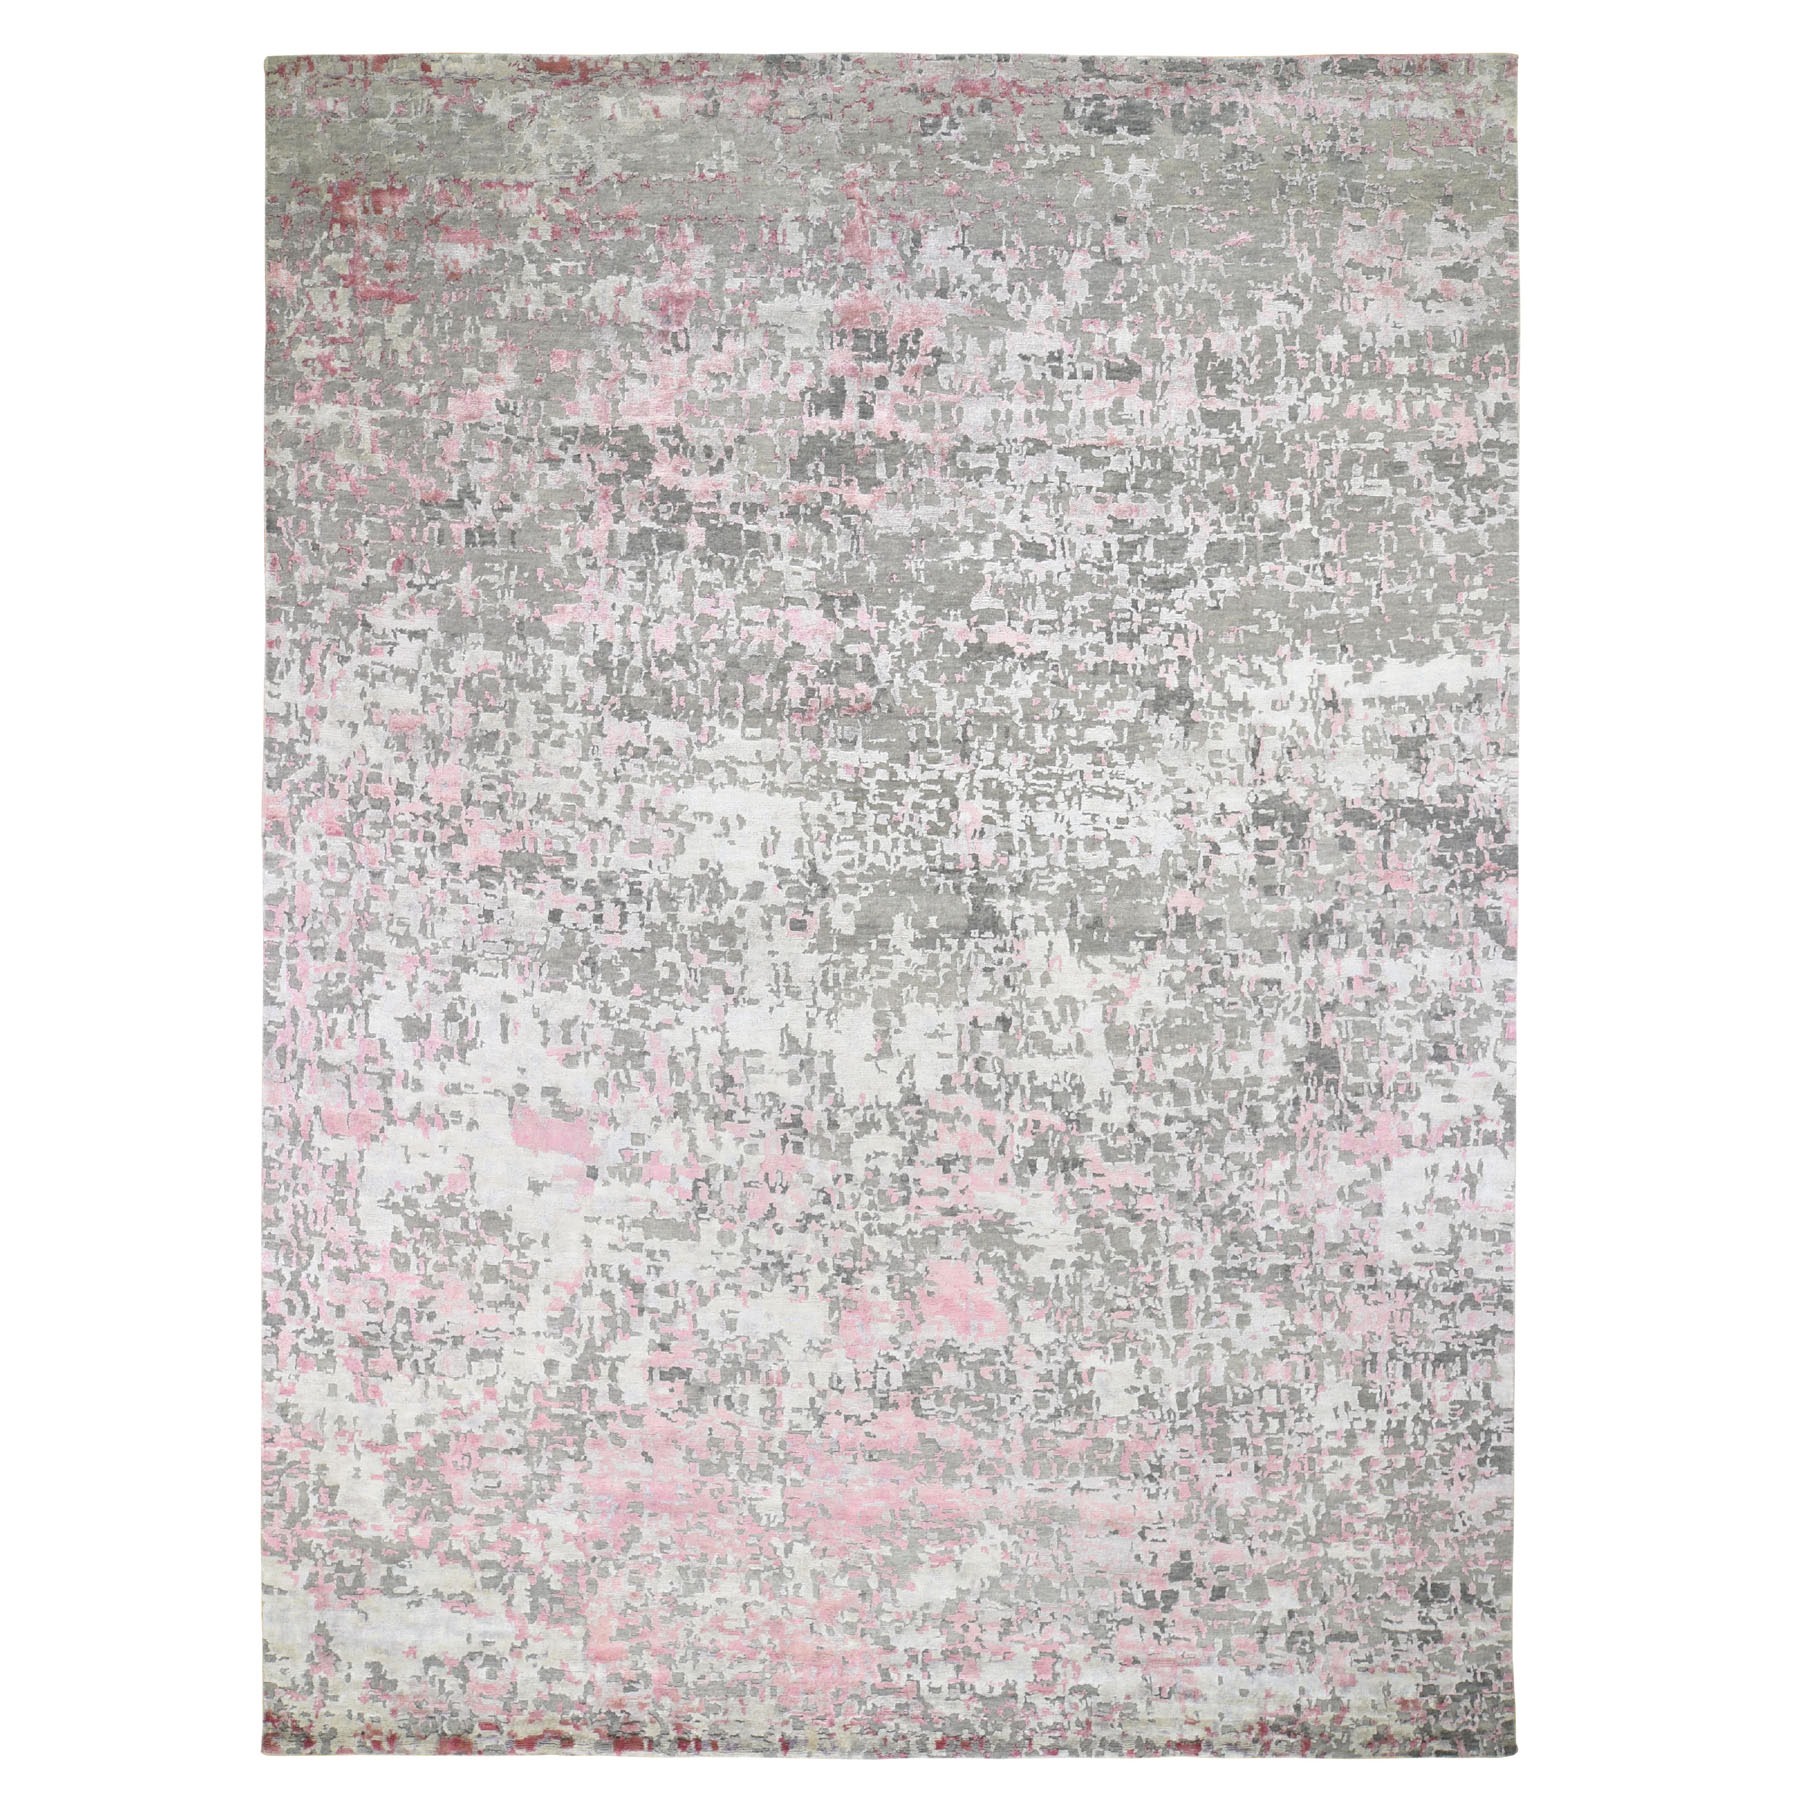 9'x12' Pink Hi-Lo Pile Abstract Design Wool And Silk Hand Woven Oriental Rug 